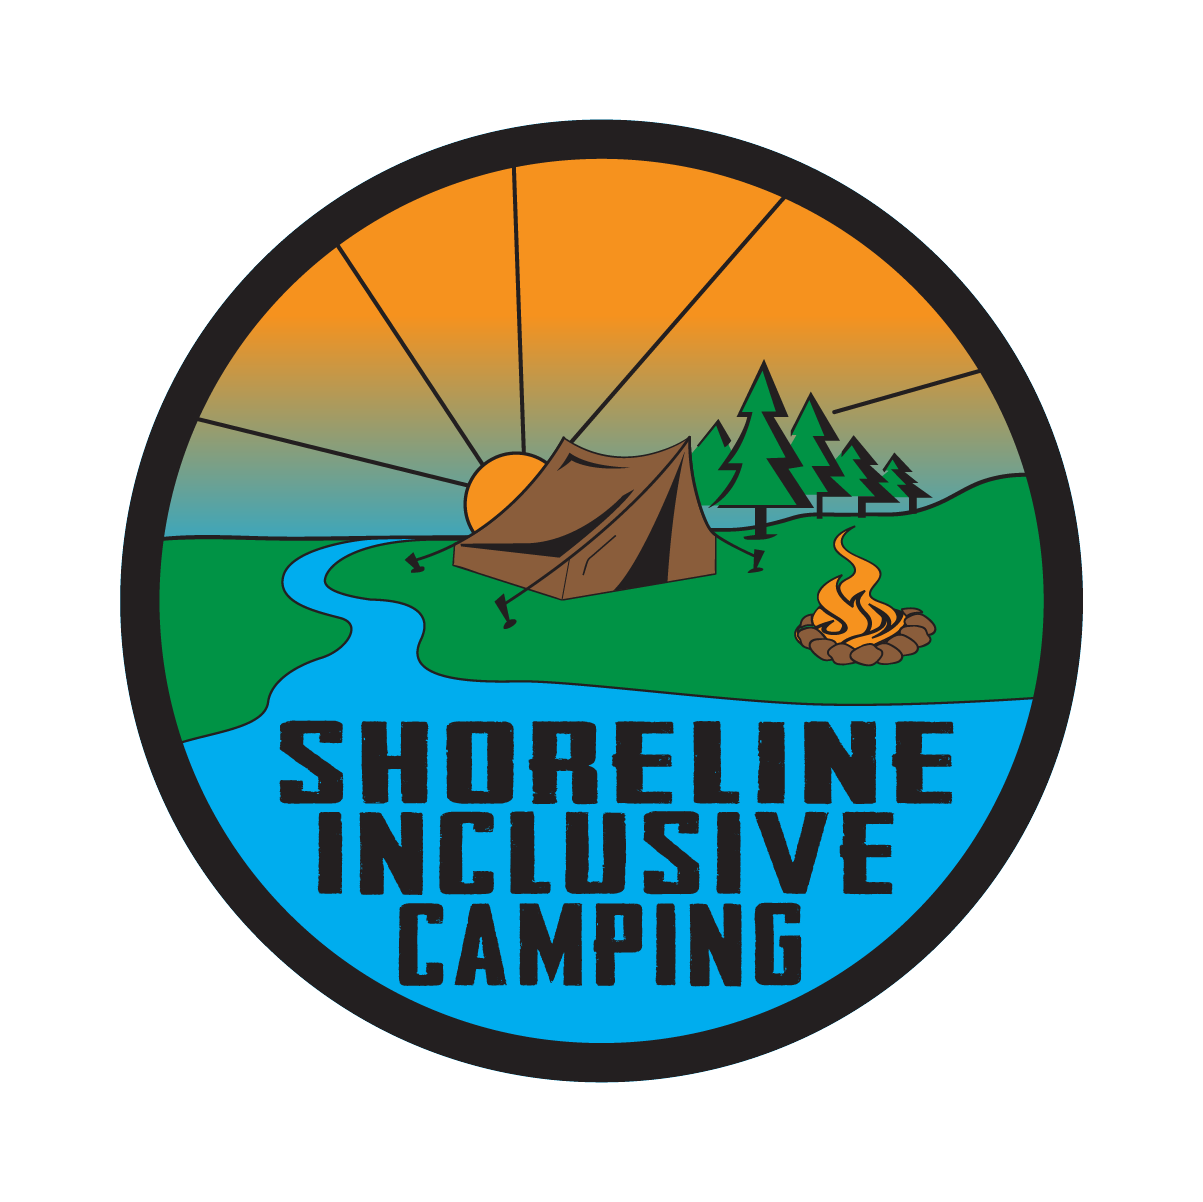 Copy of Shoreline Inclusive Camping - commercial photographer, sporting goods, lifestyle photographer, outdoor company